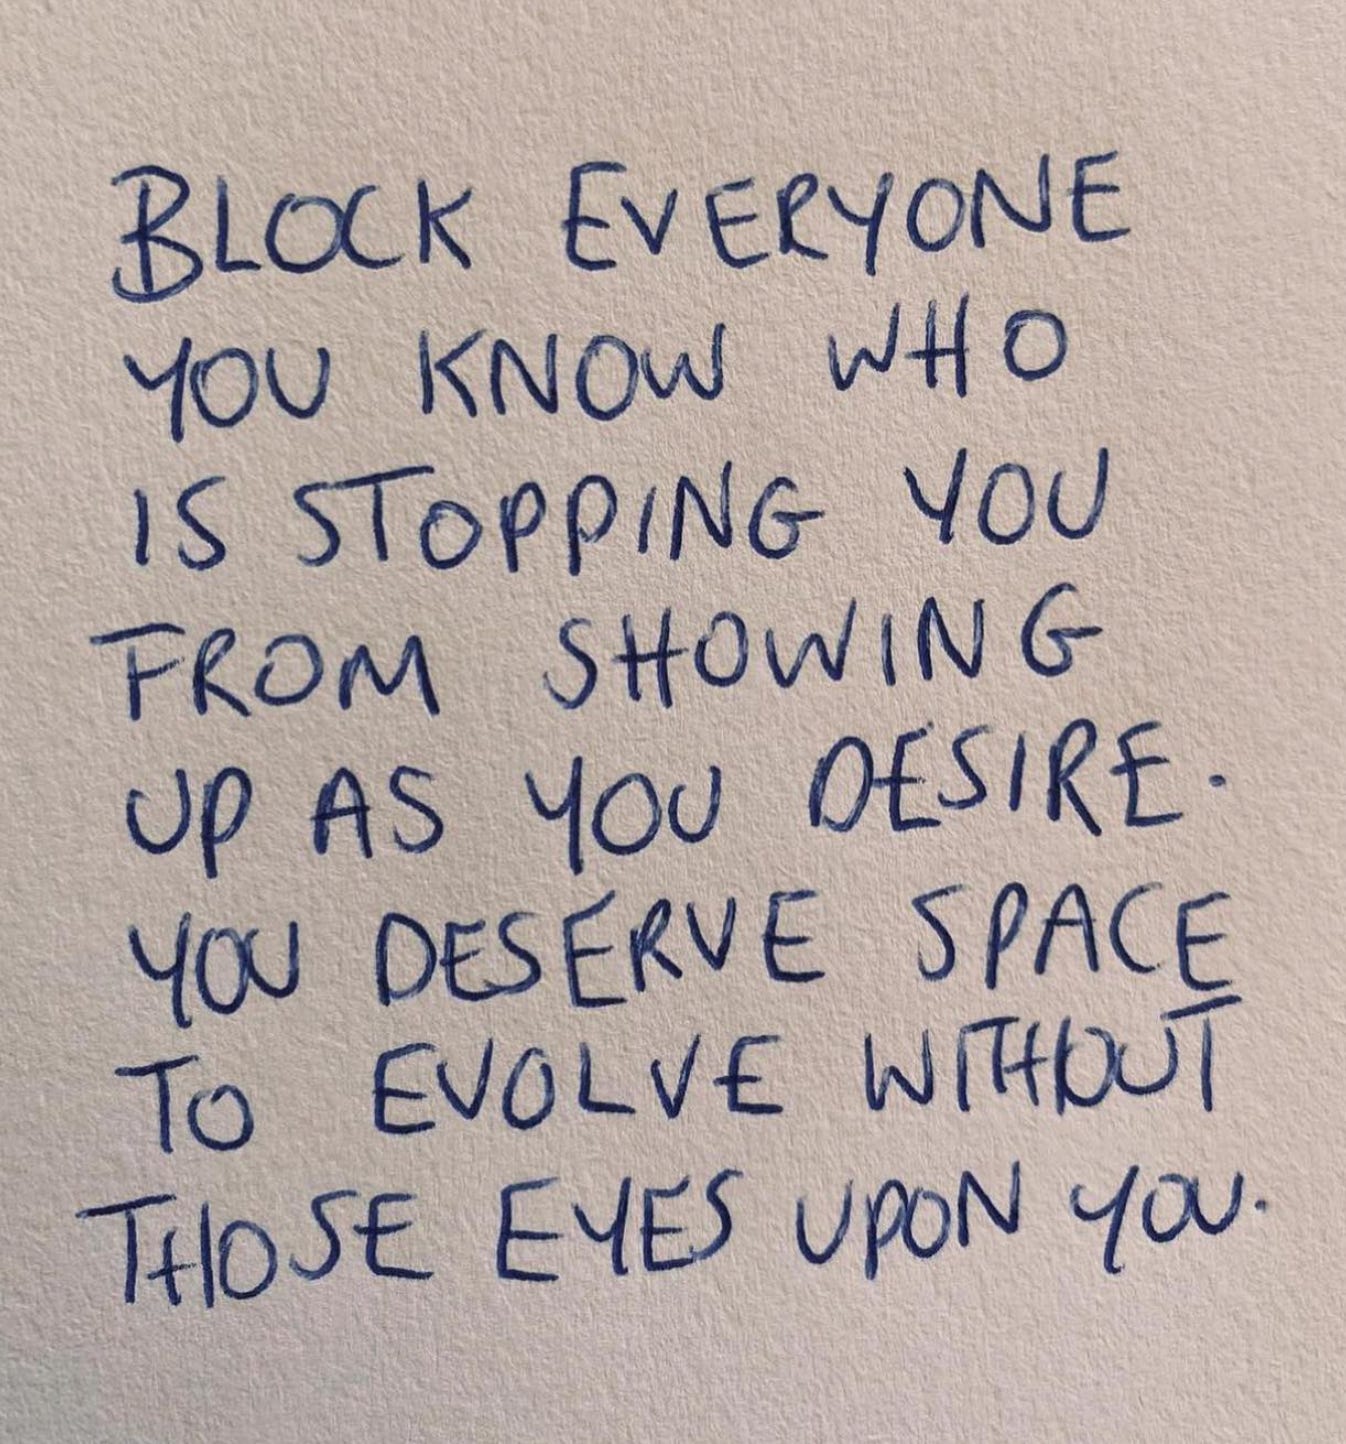 Block everyone you know who is stopping you from showing up as you desire. You deserve space to evolve without those eyes on you.